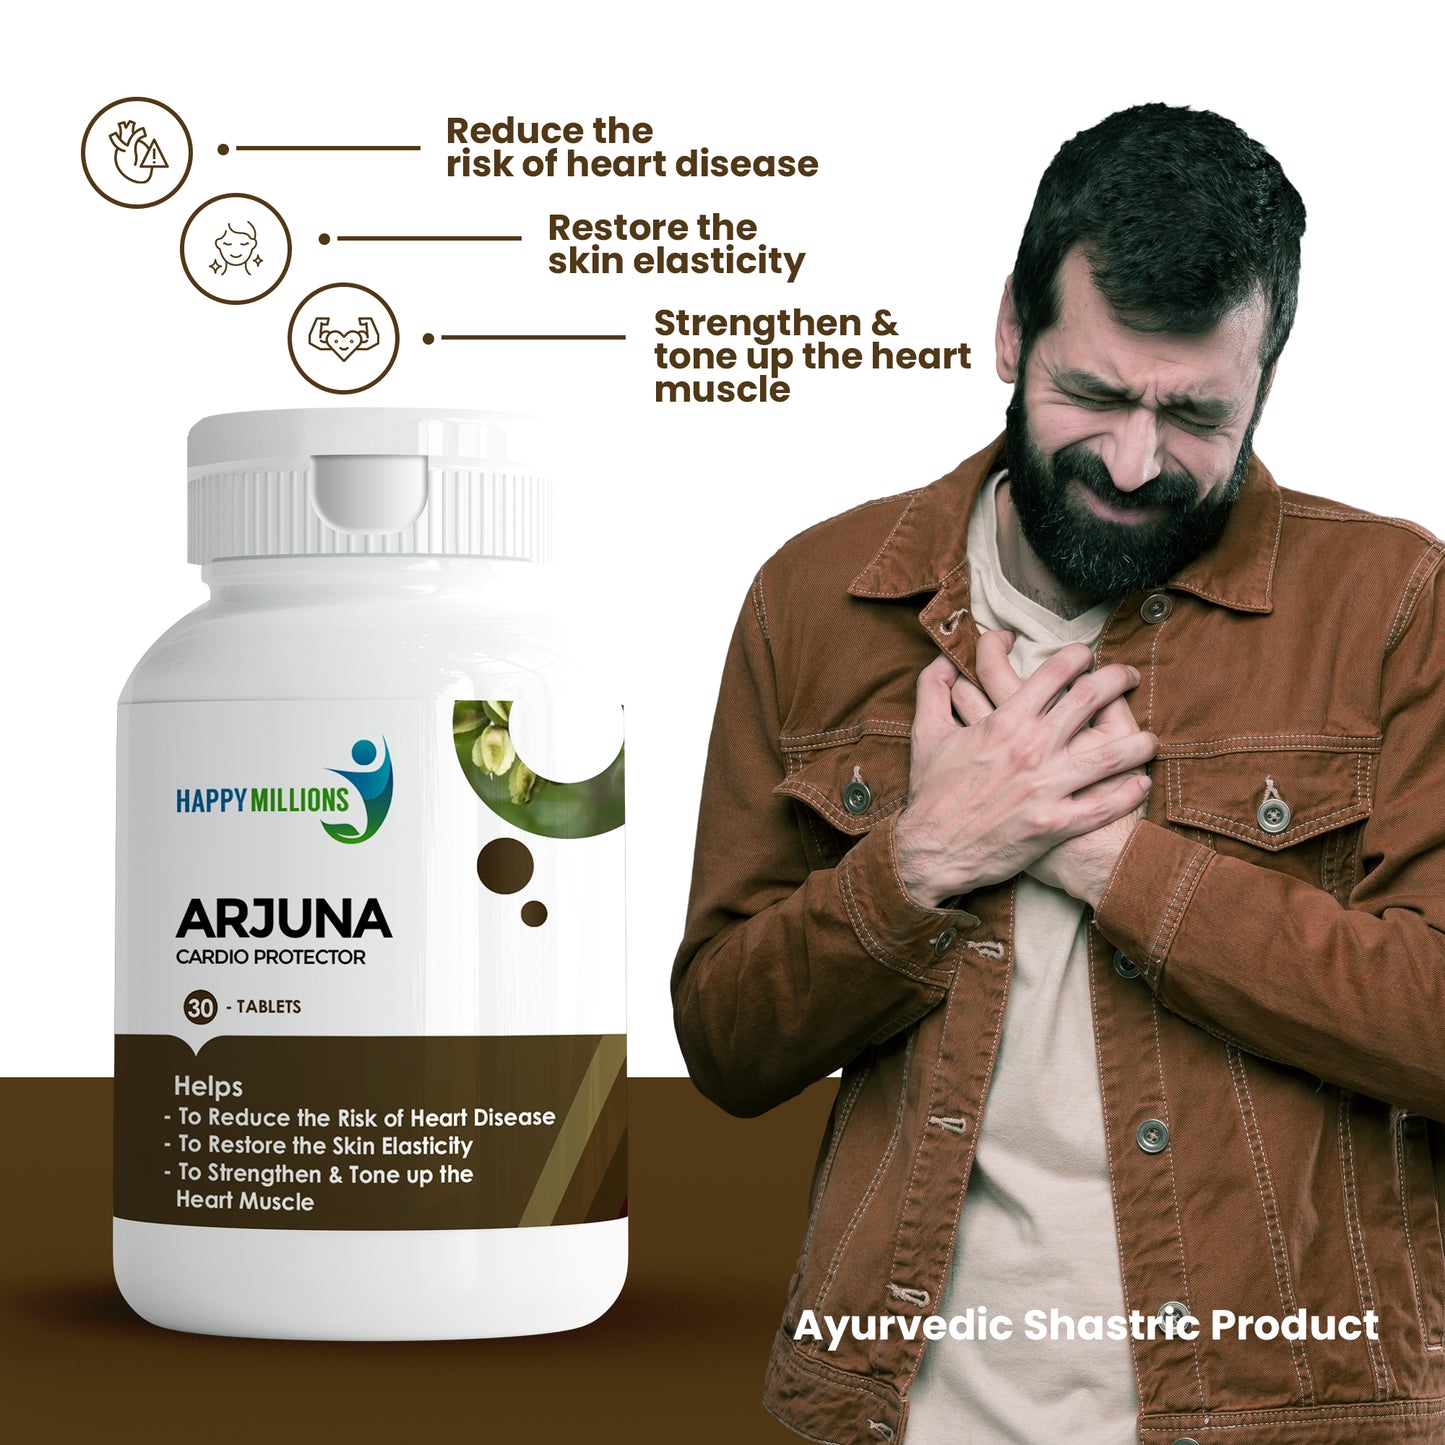 Discover Heart Health Happy Millions Arjuna Benefits for Cardiovascular Support and Wellness.